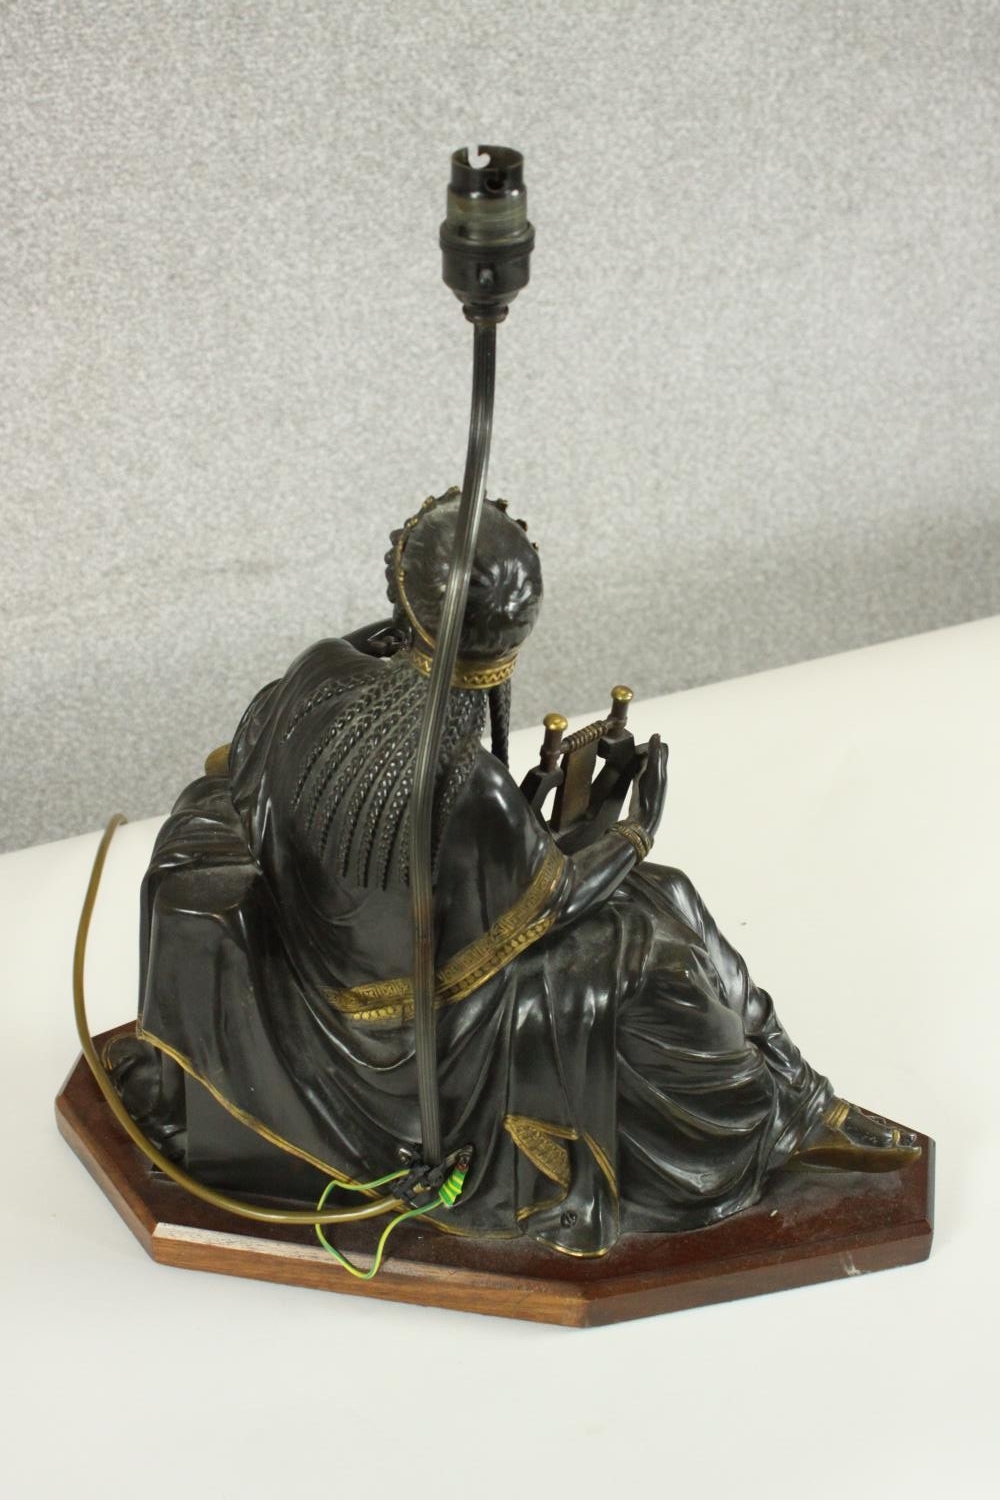 An Egyptian revival gilded bronze figural table lamp depicted as a female in flowing robes holding a - Image 7 of 7